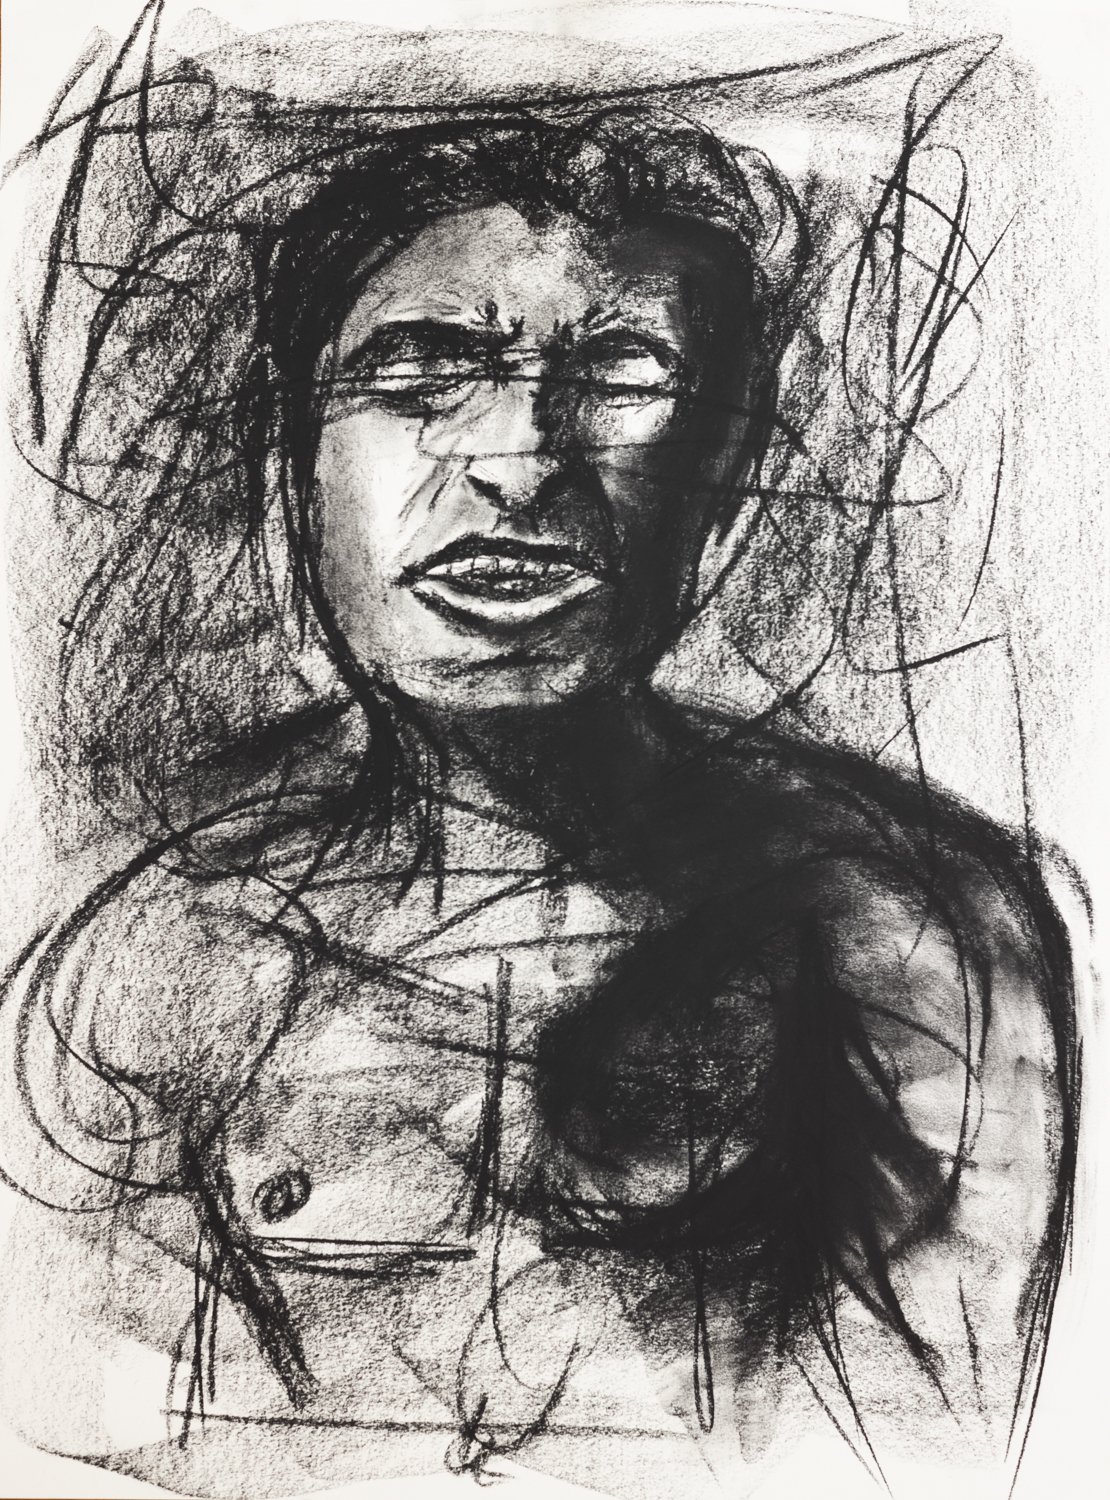   Untitled.       2022. Charcoal on Paper.  18 x 24 in (45.7 x 61 cm) 